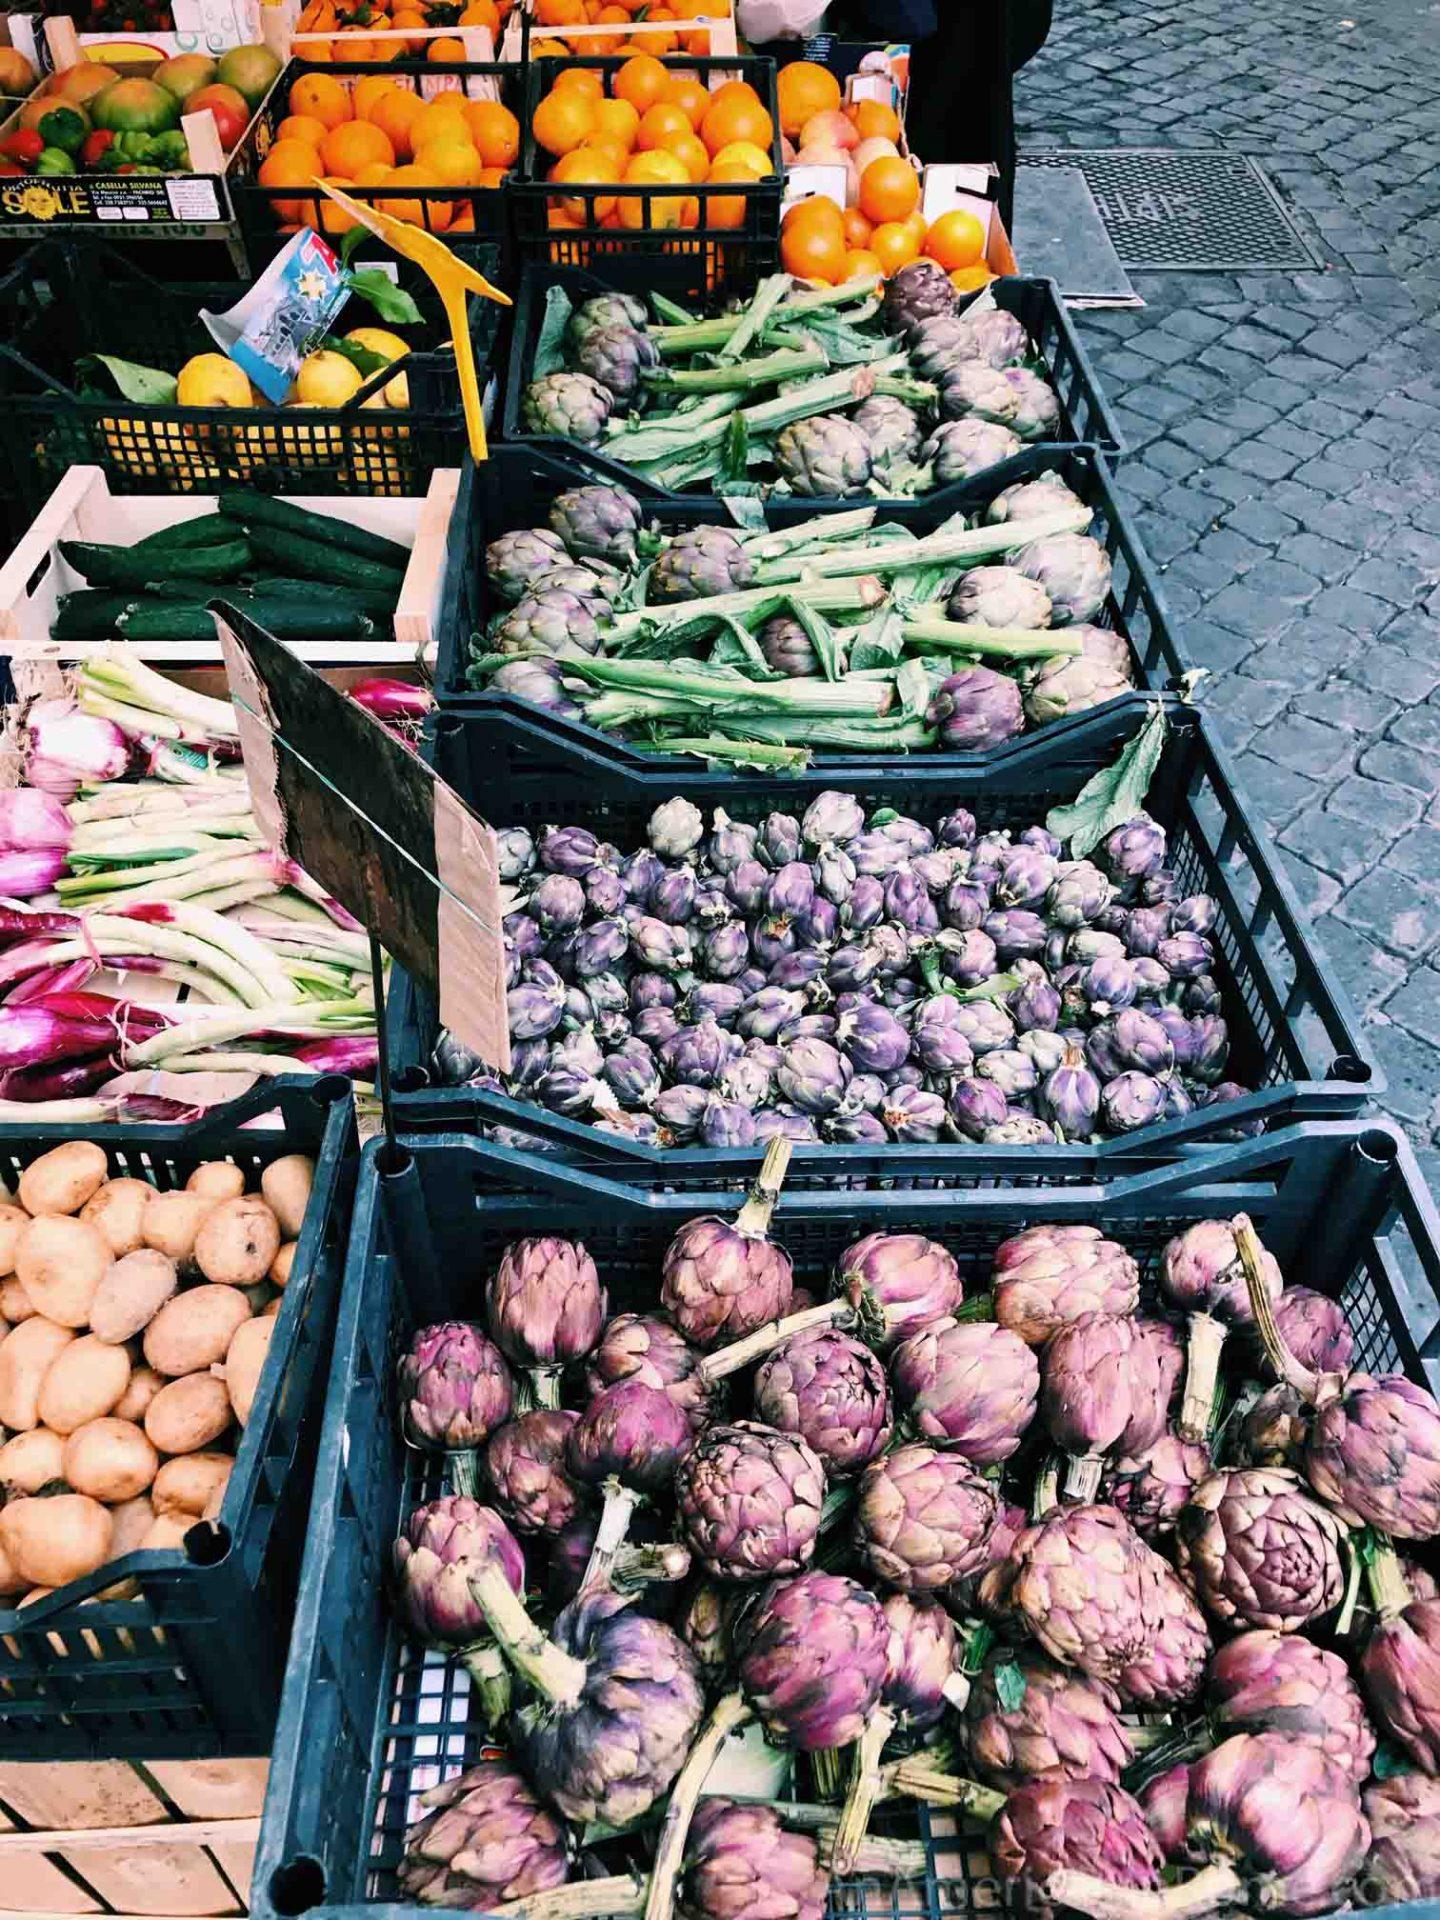 three different kinds of artichokes at a market stalls in Rome